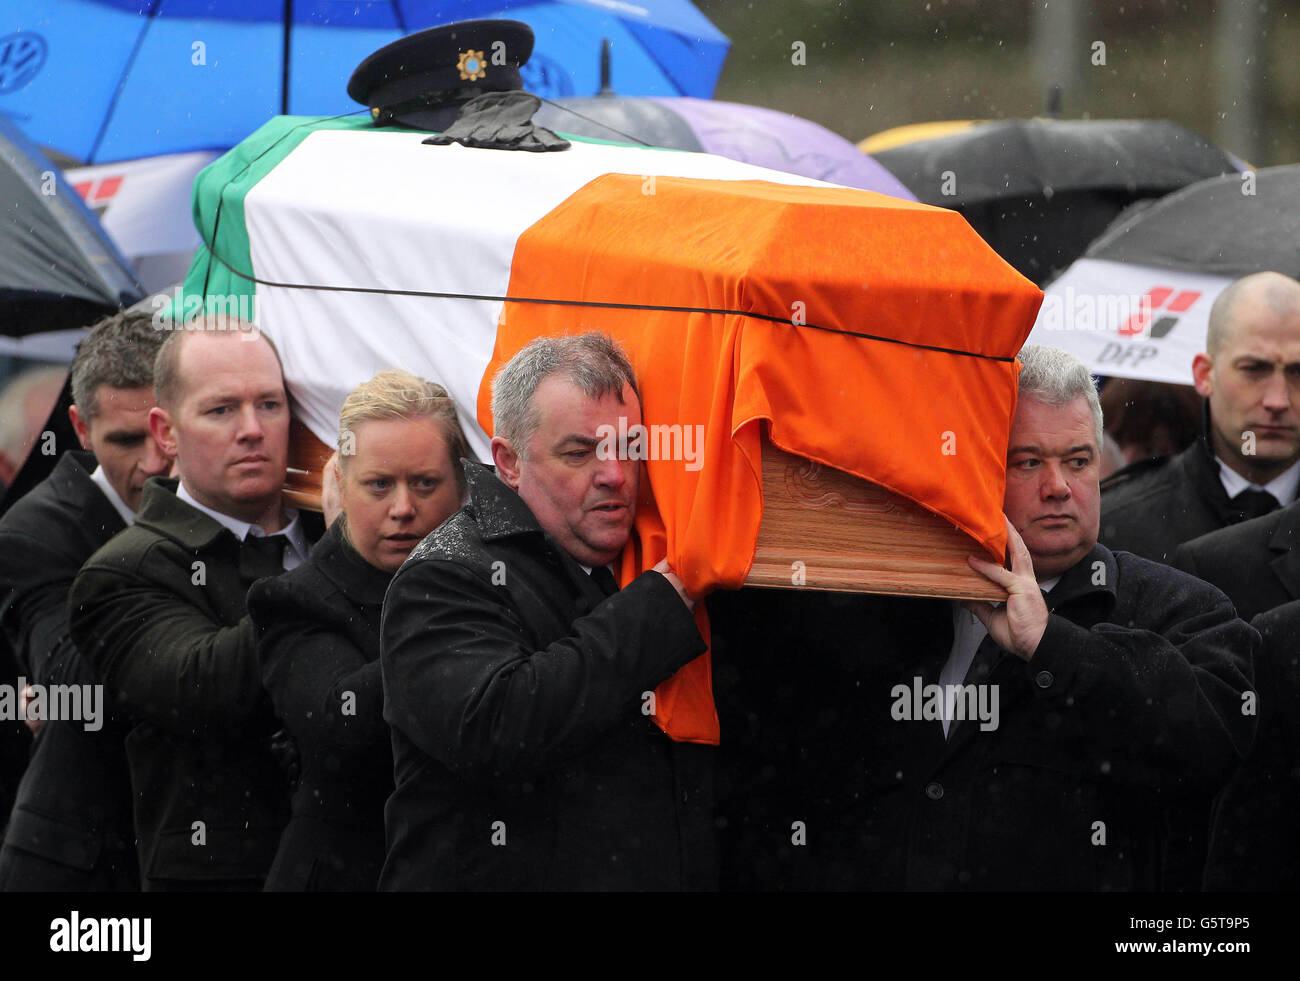 Detective Garda Joe Ryan who witnessed the murder (right) helps carries the coffin during the state funeral of Detective Garda Adrian Donohoe in Dundalk today. Stock Photo